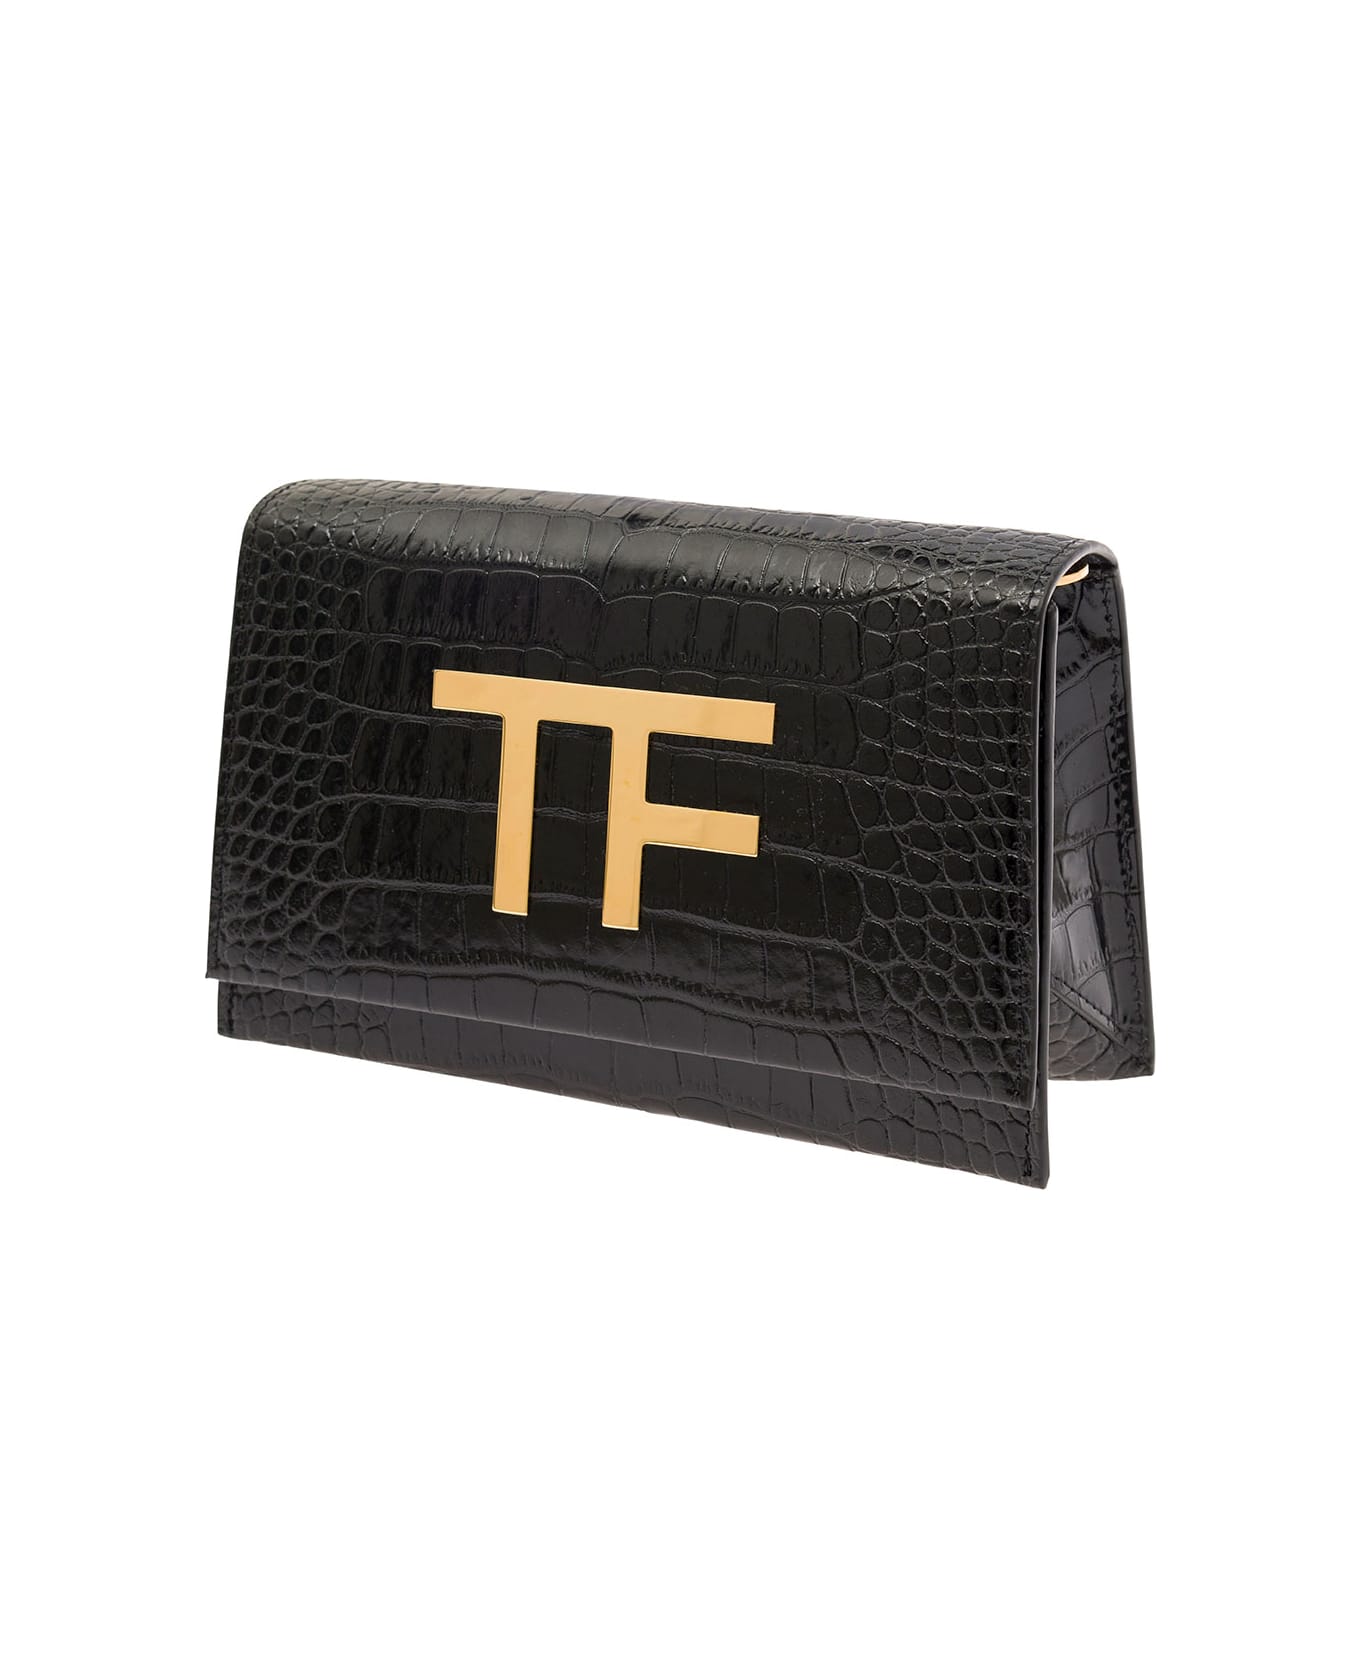 Tom Ford Black Shoulder Bag With Tf Logo Detail In Coco Leather Woman - Black